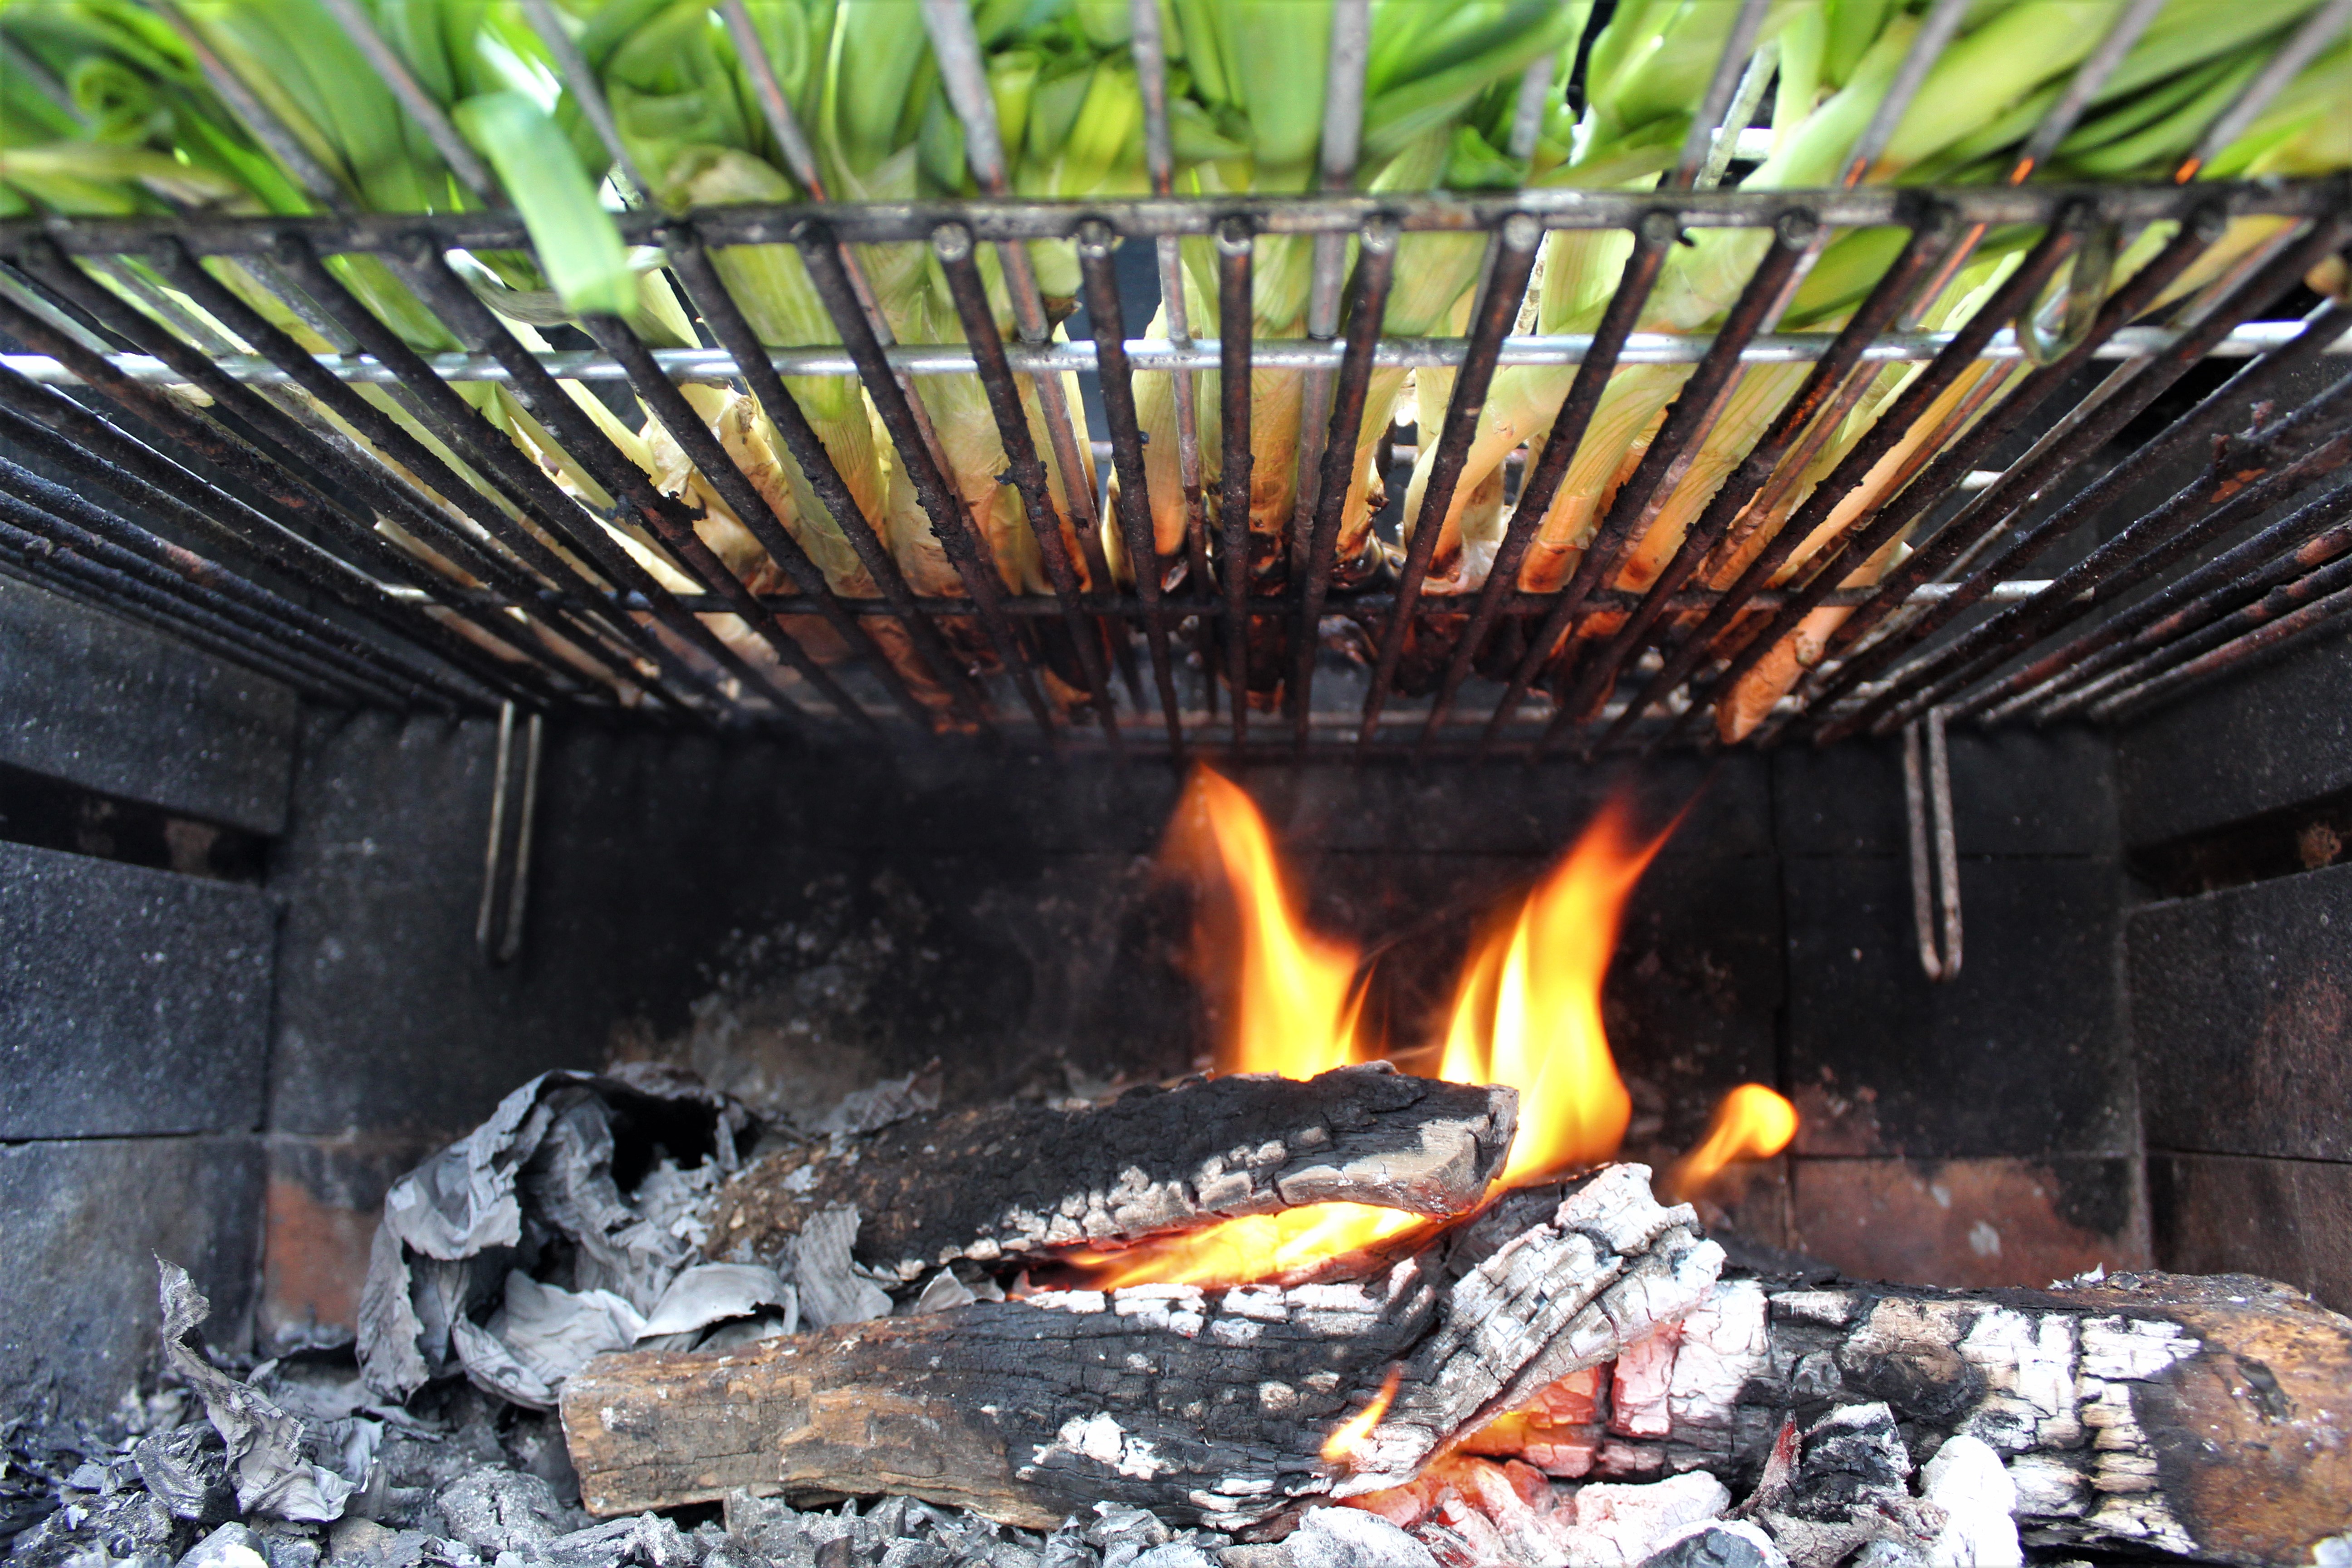 Calçots for everyone by Besides the Obvious